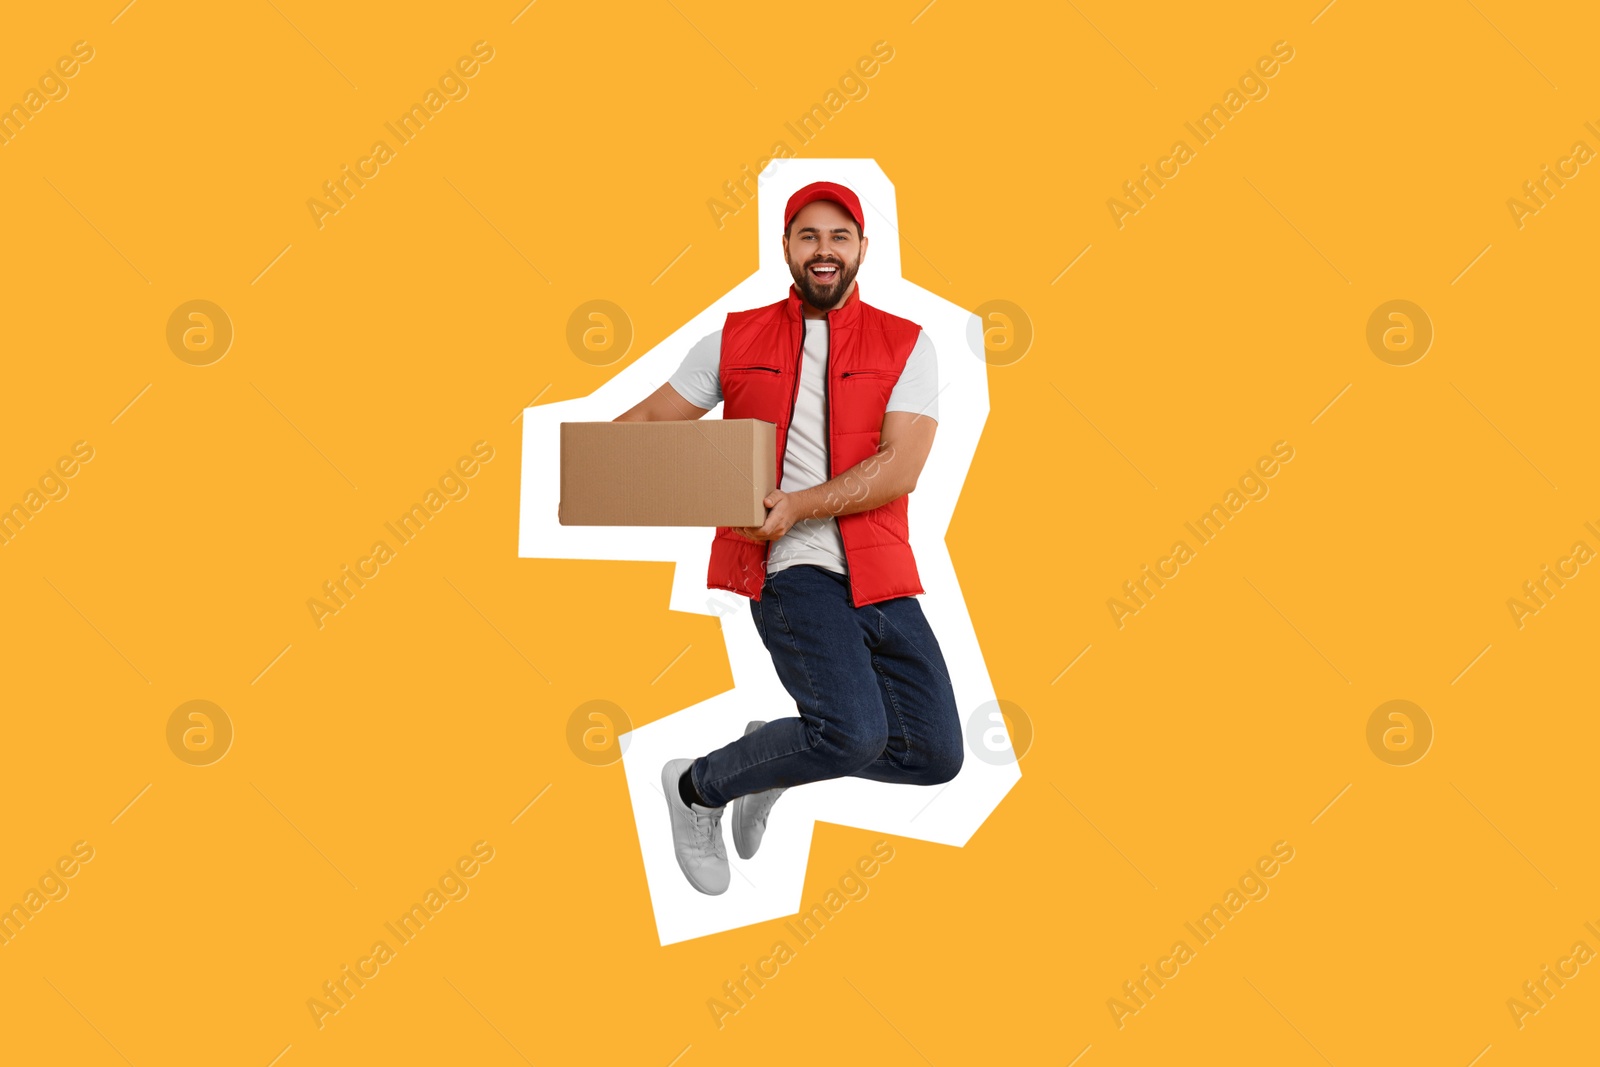 Image of Happy courier with parcel jumping on orange background